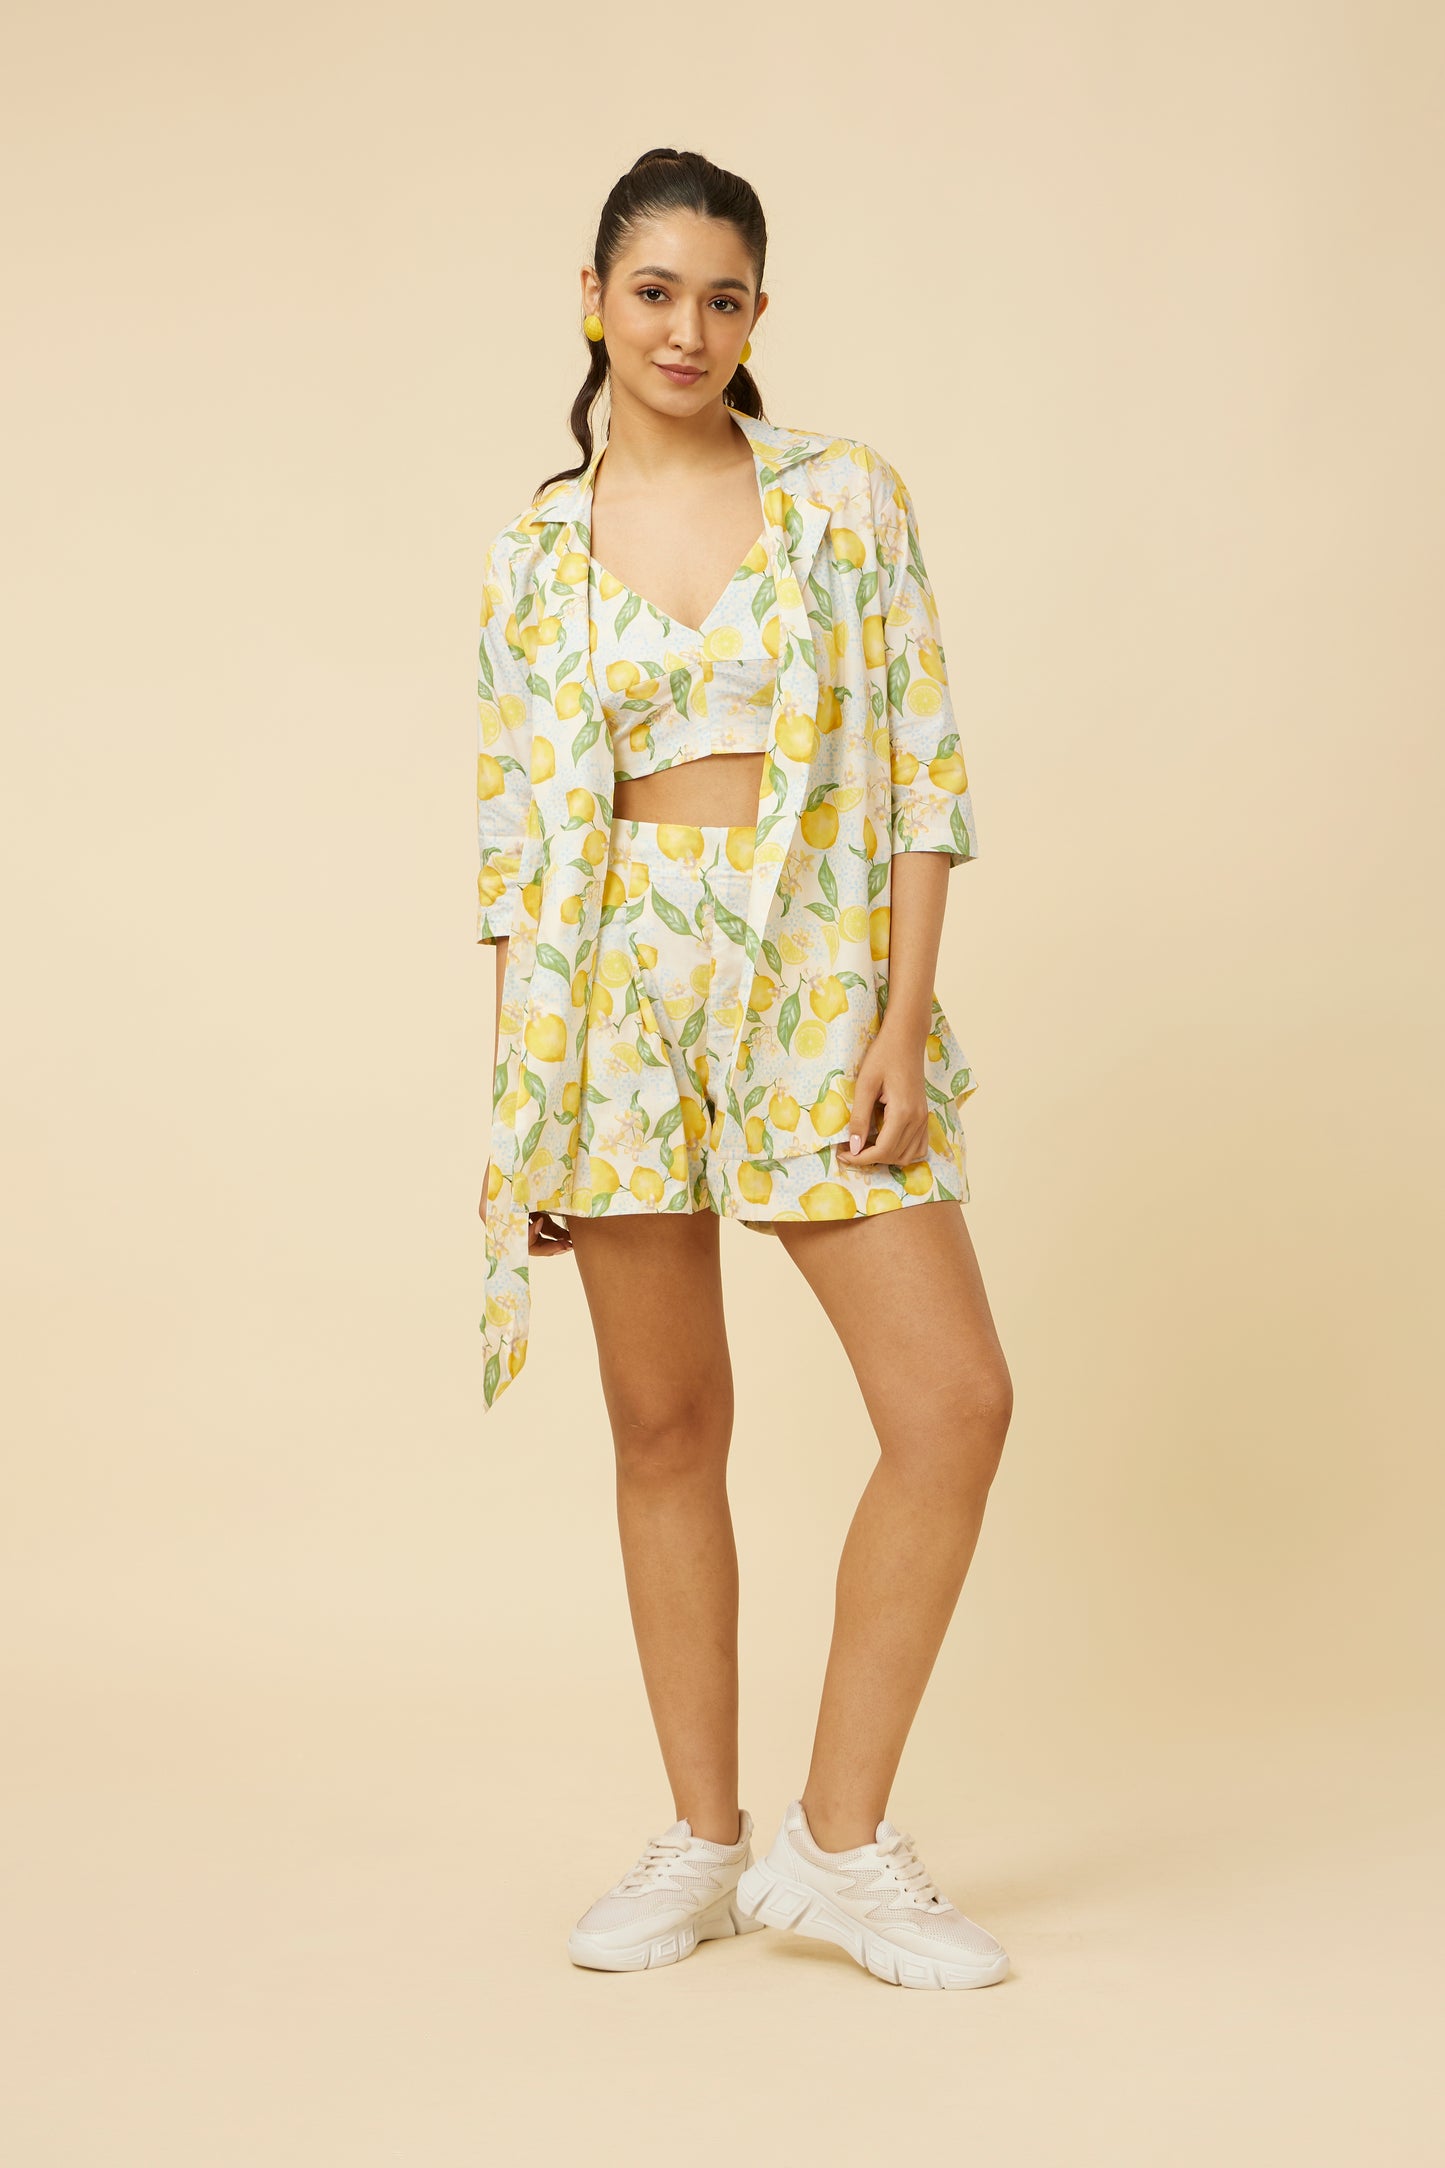 Model displays the Citrus Dream Shirt & Shorts Co-Ord Set, featuring a lively lemon tile print. The shirt’s side-tie design adds a unique twist to the shirt-jacket hybrid style, while the shorts ensure comfort with side pockets and back elastic.